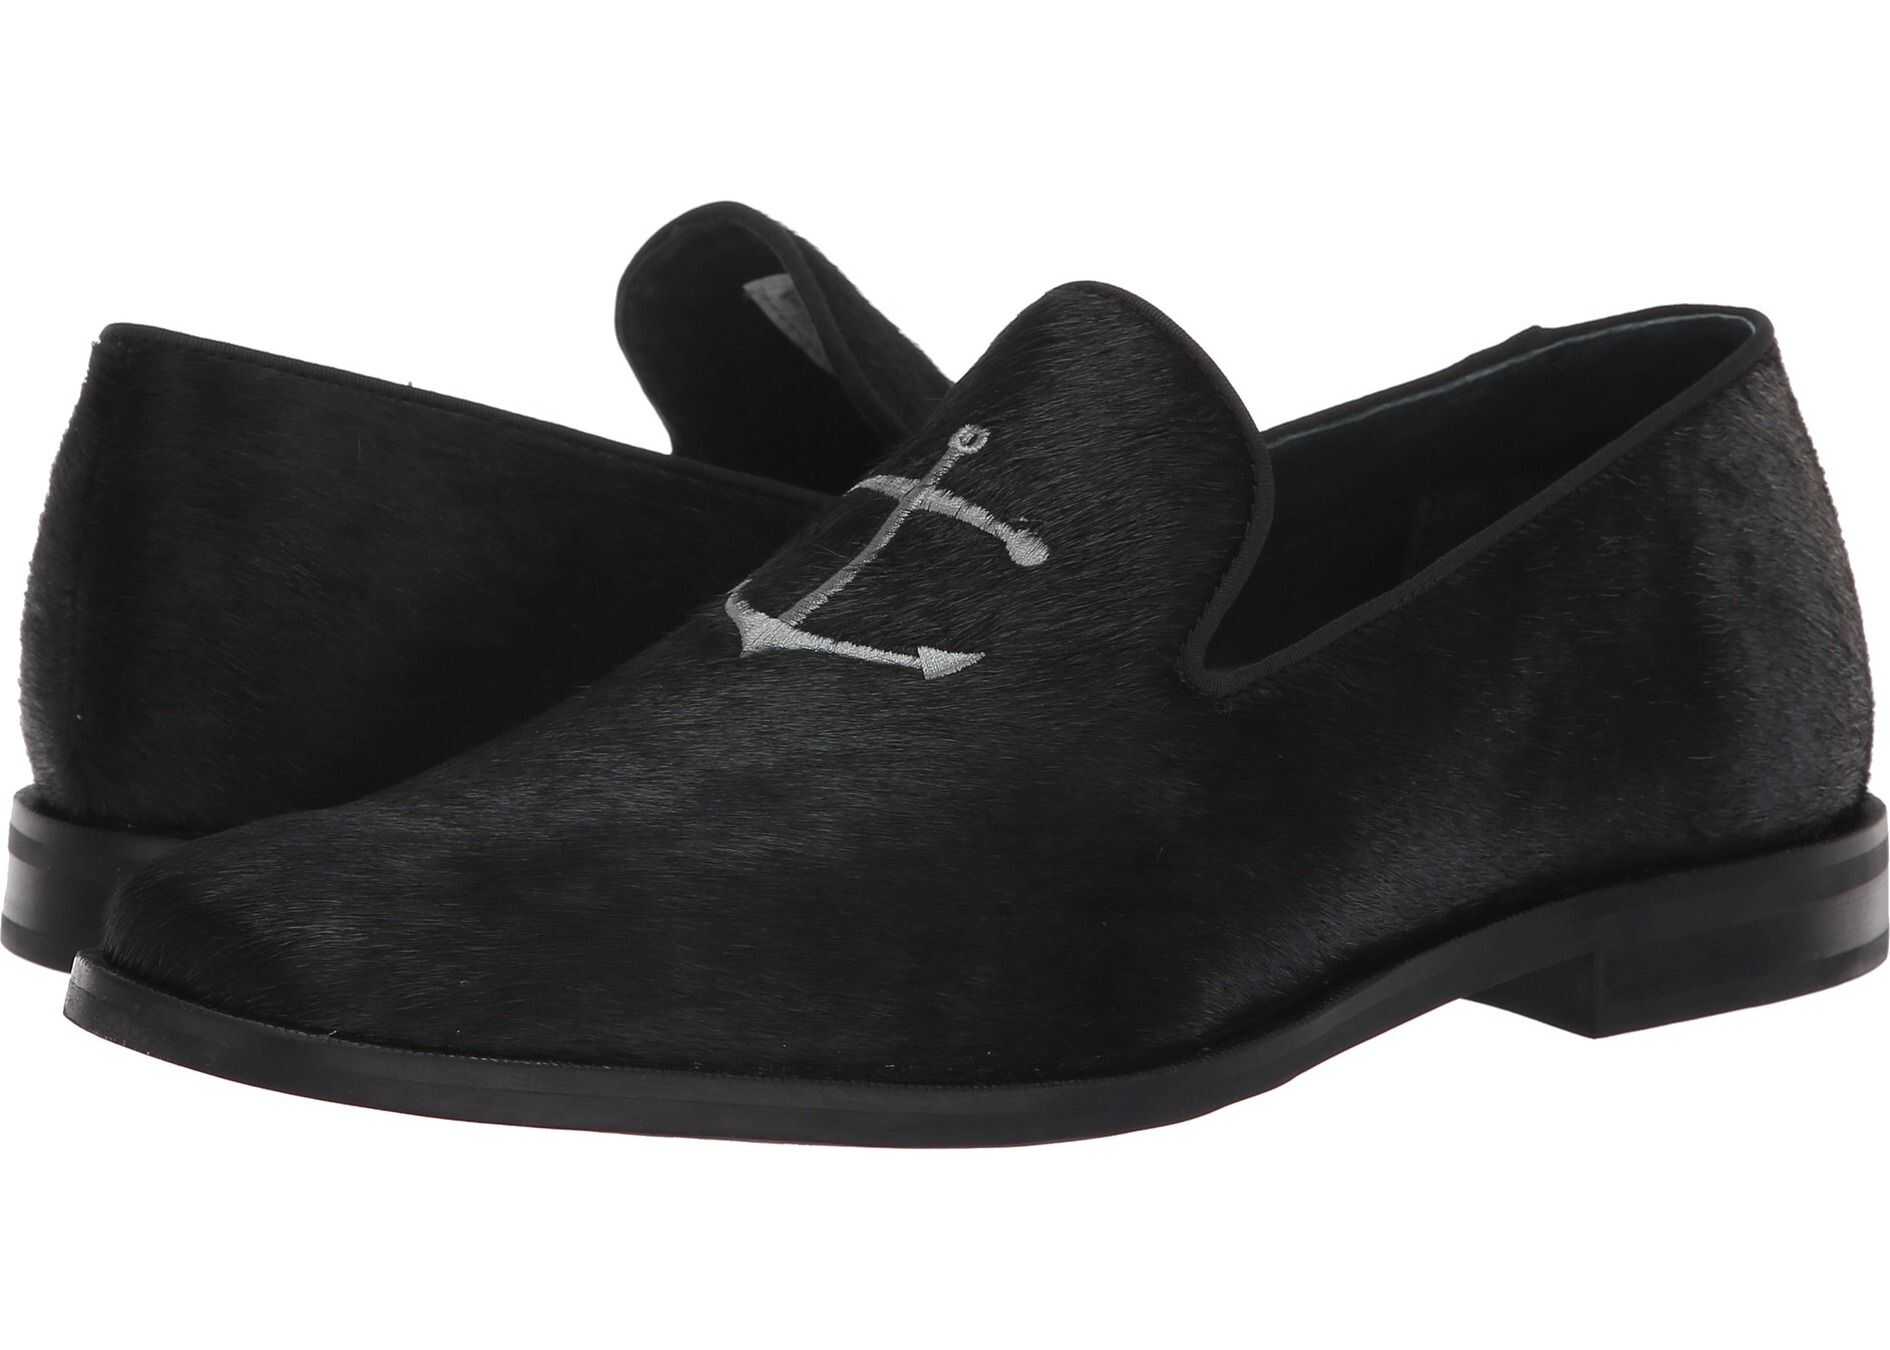 Sperry Top-Sider Overlook Leather Smoking Slipper Black Pony